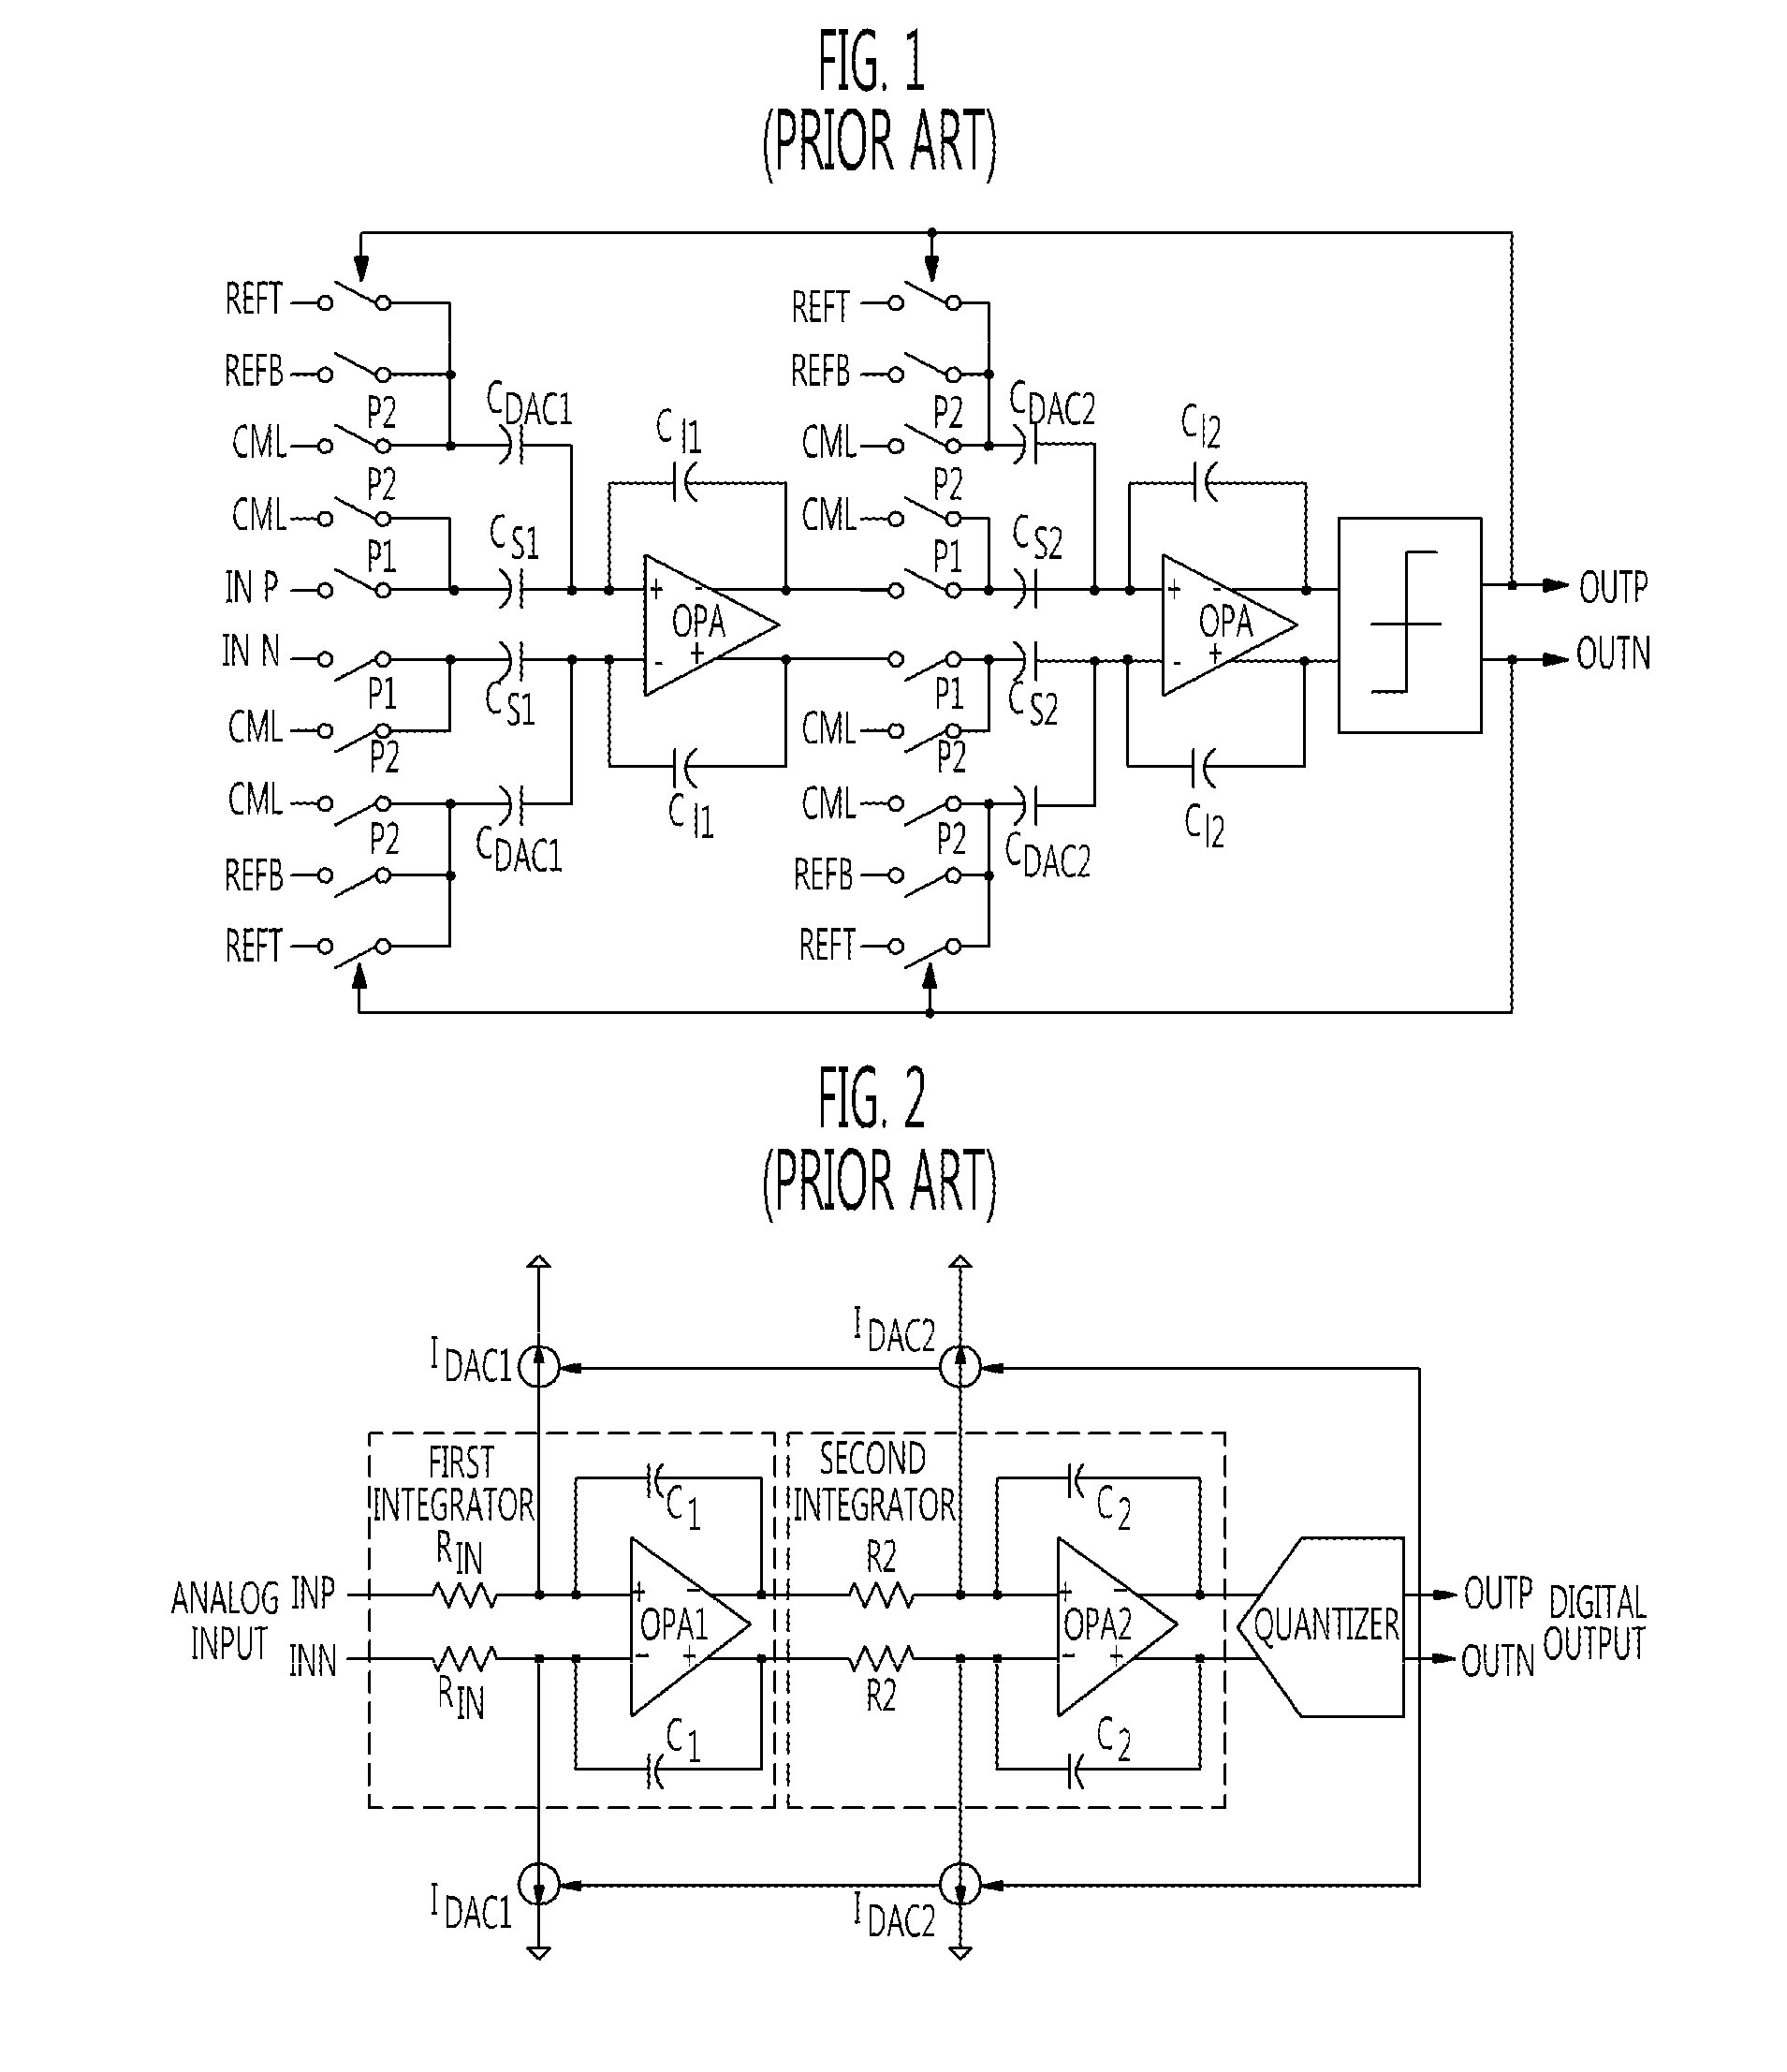 Active resistance-capacitor integrator and continuous-time sigma-delta modulator with gain control function